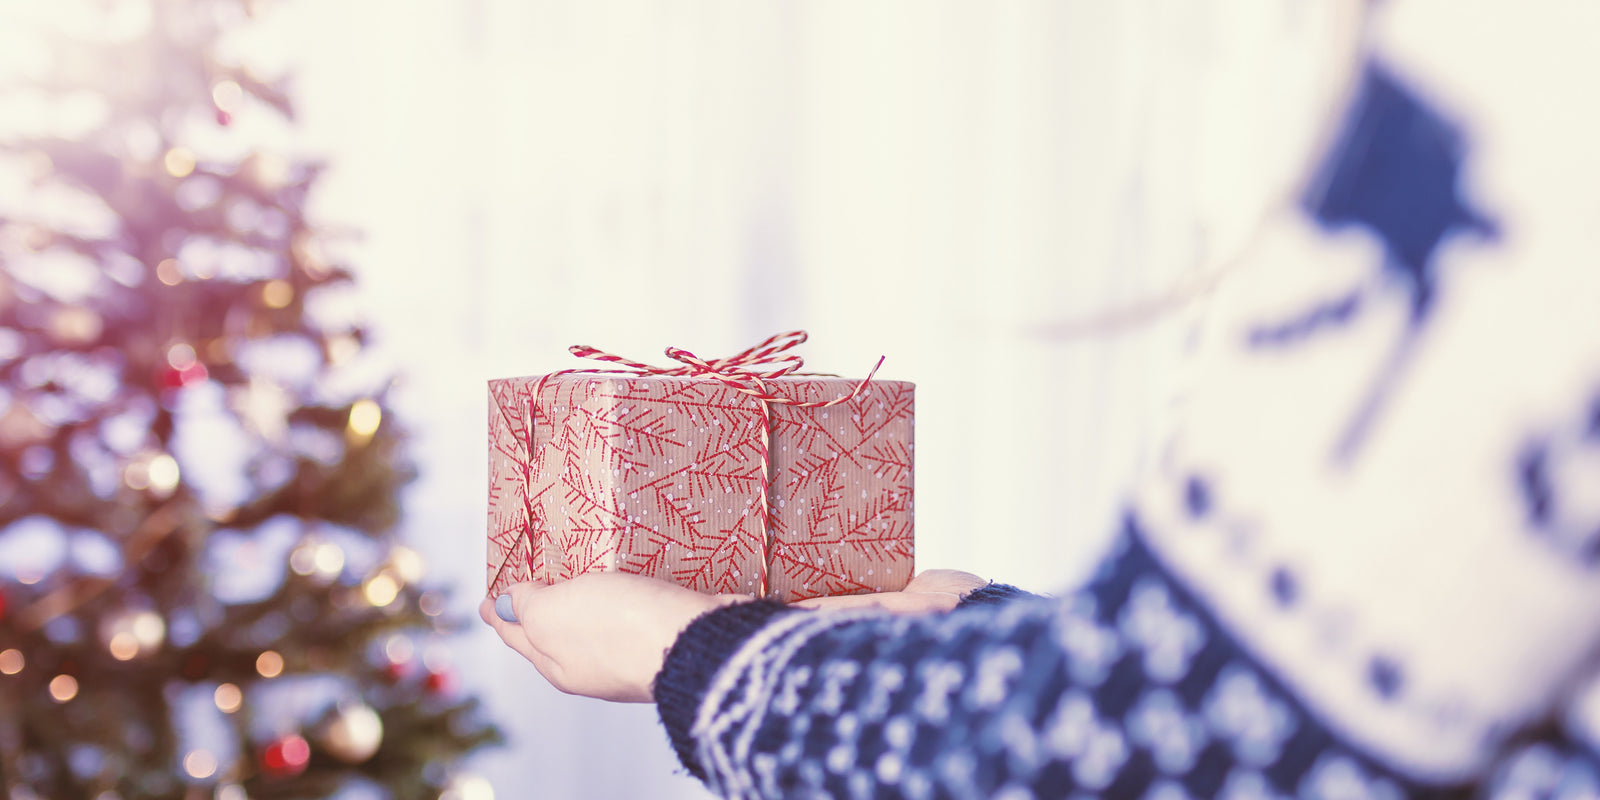 25 Questions to Ask for Christmas Gift Ideas